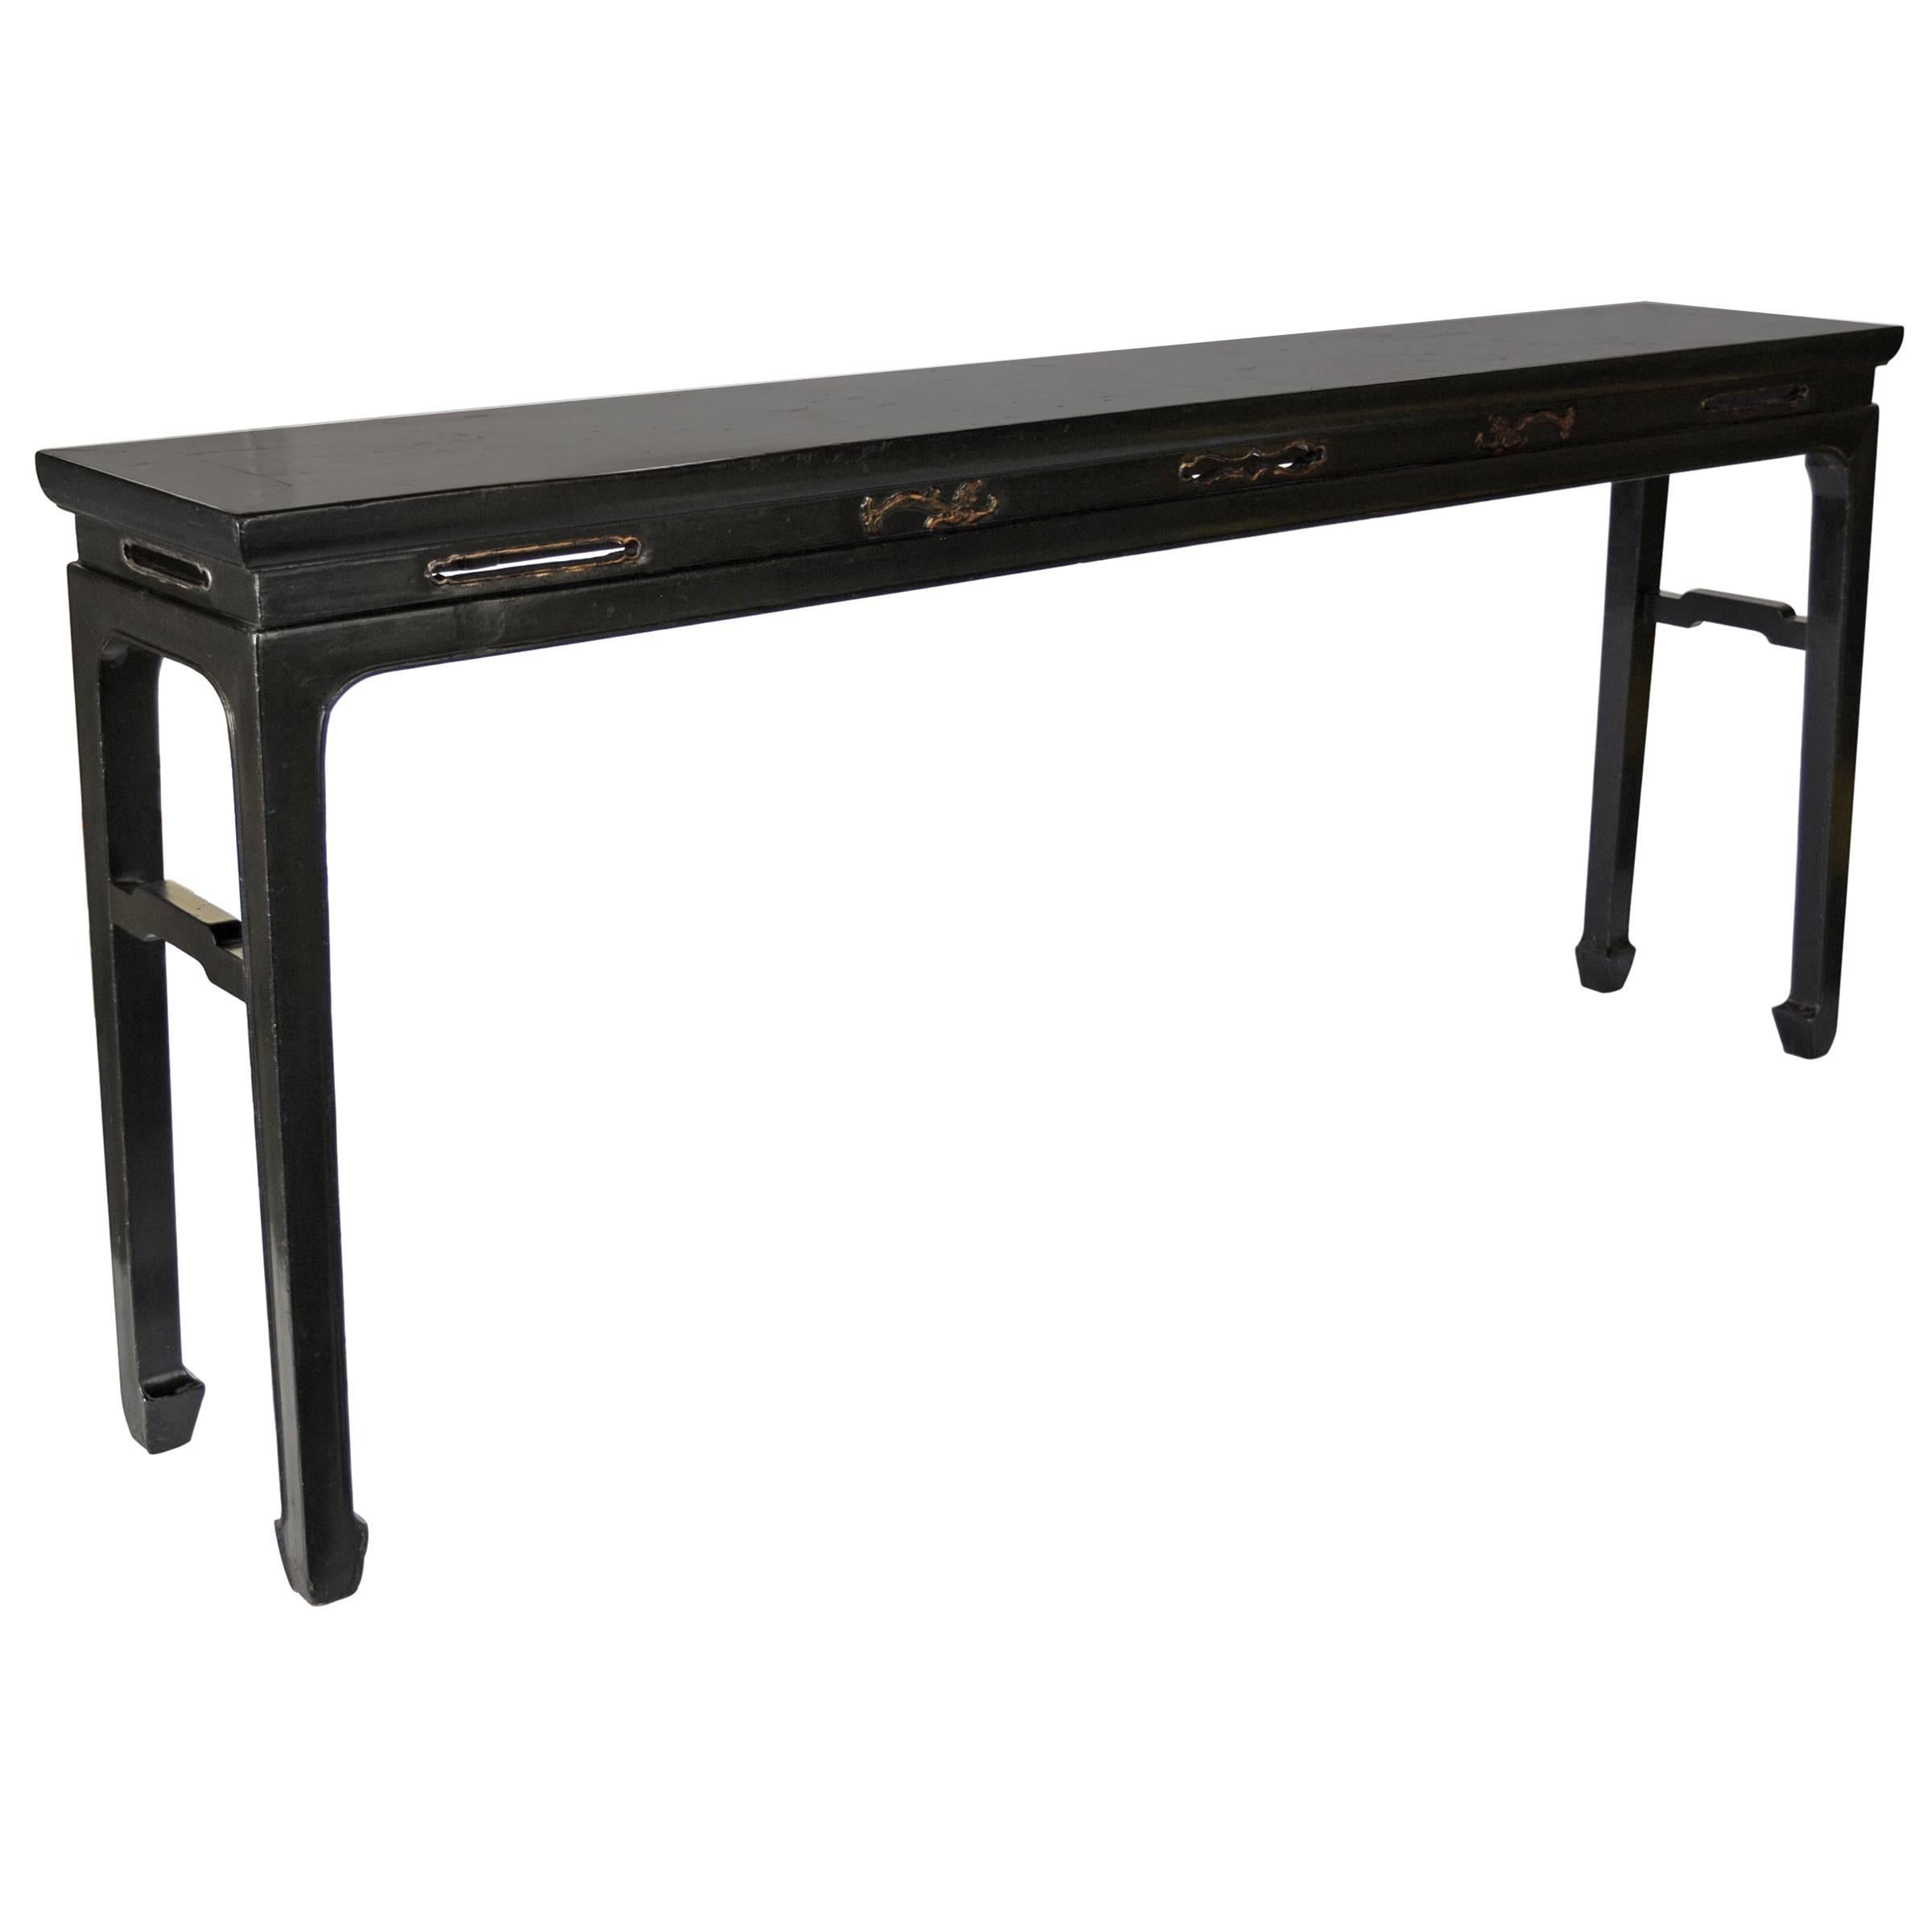 This refined plank top table is originally from a 19th century Chinese scholar’s rarefied home. There are not many surviving tables with such elegant proportions, the hoof feet and the legs relate beautifully to the top and aprons, which are carved